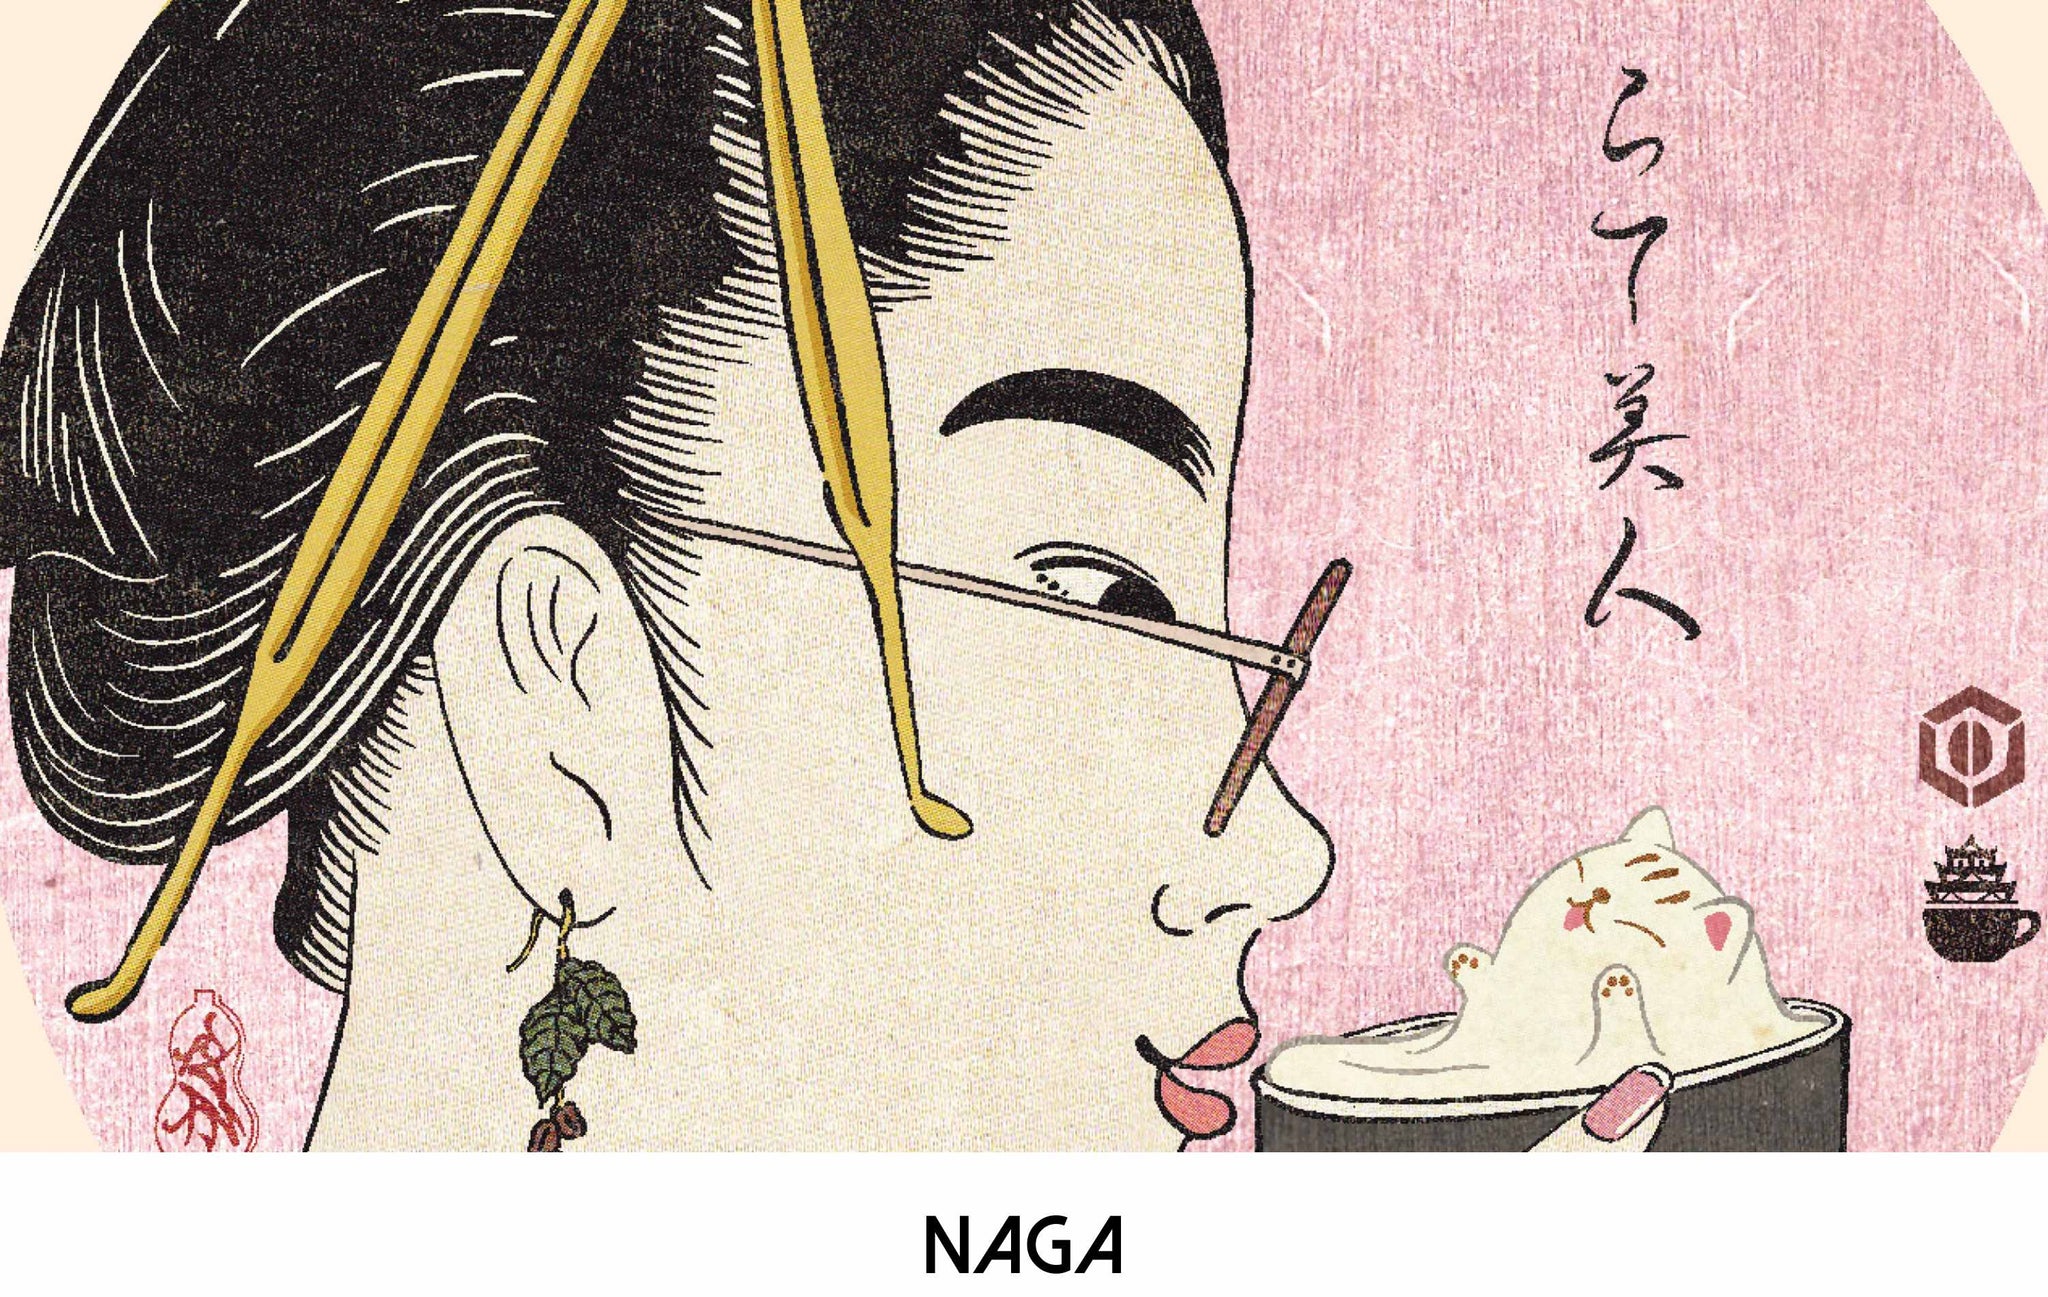 See more from Artist Naga